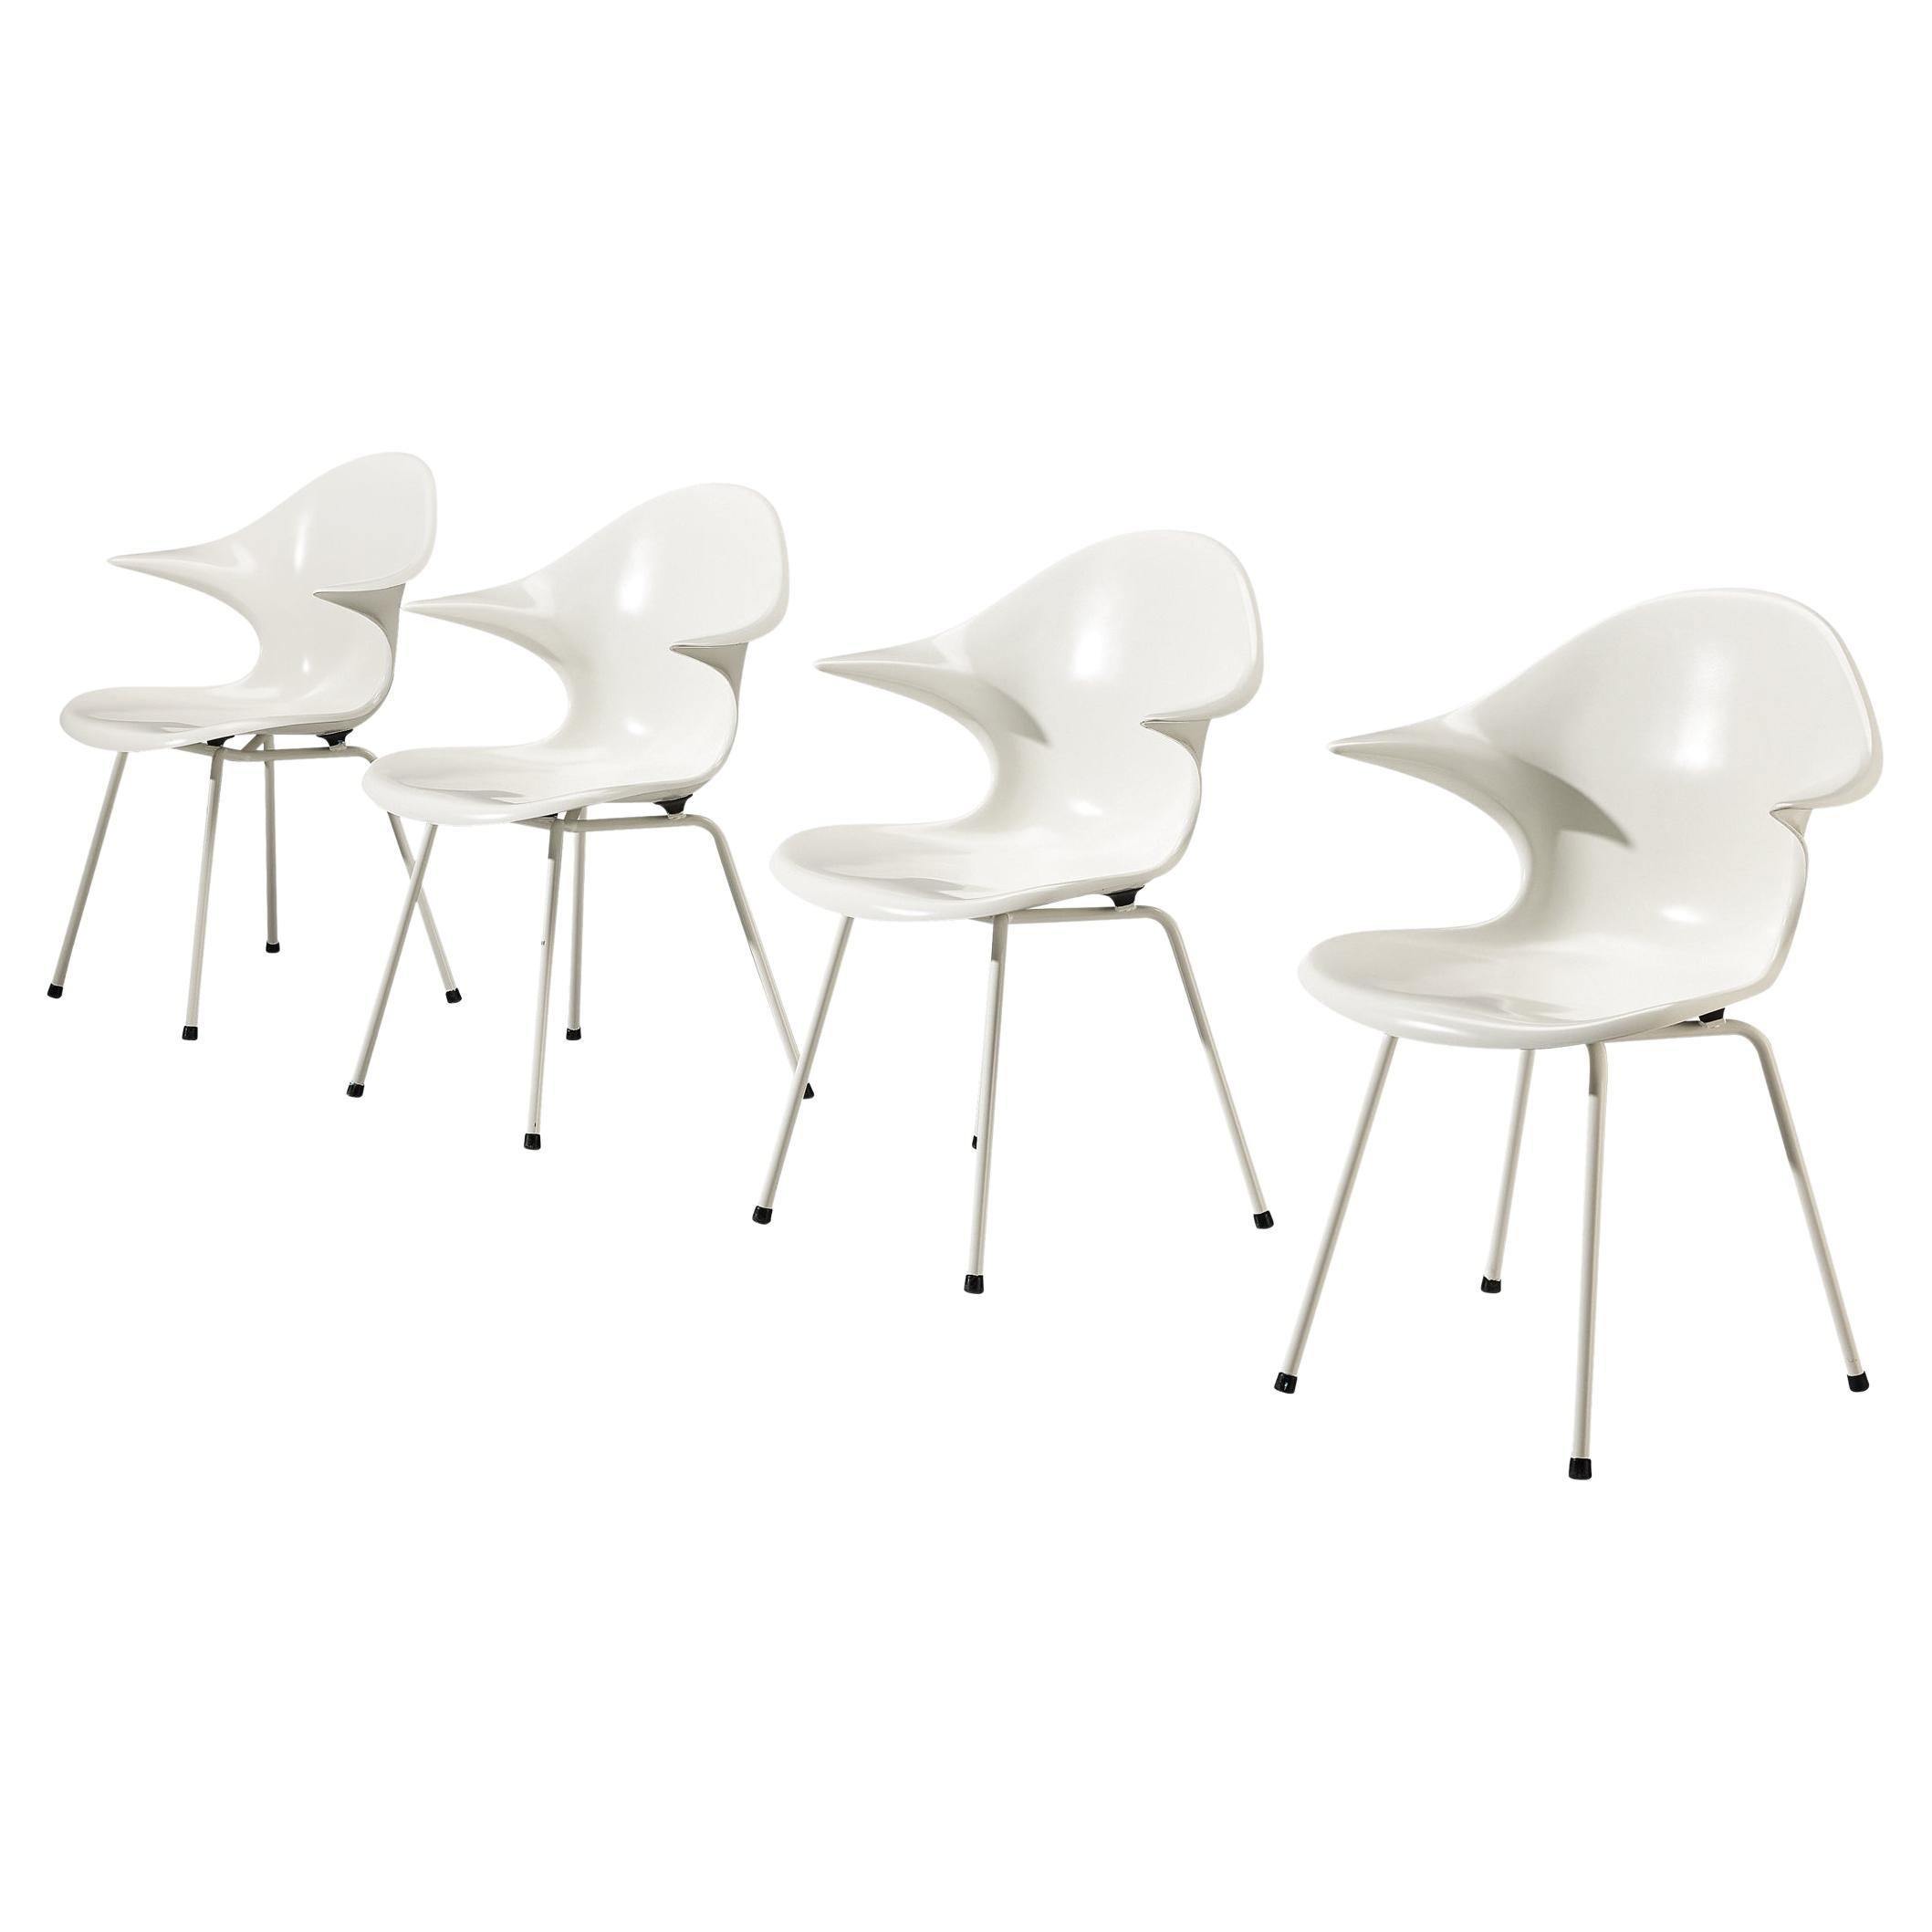 Set of Four Organic Shaped Fiberglass Chairs For Sale